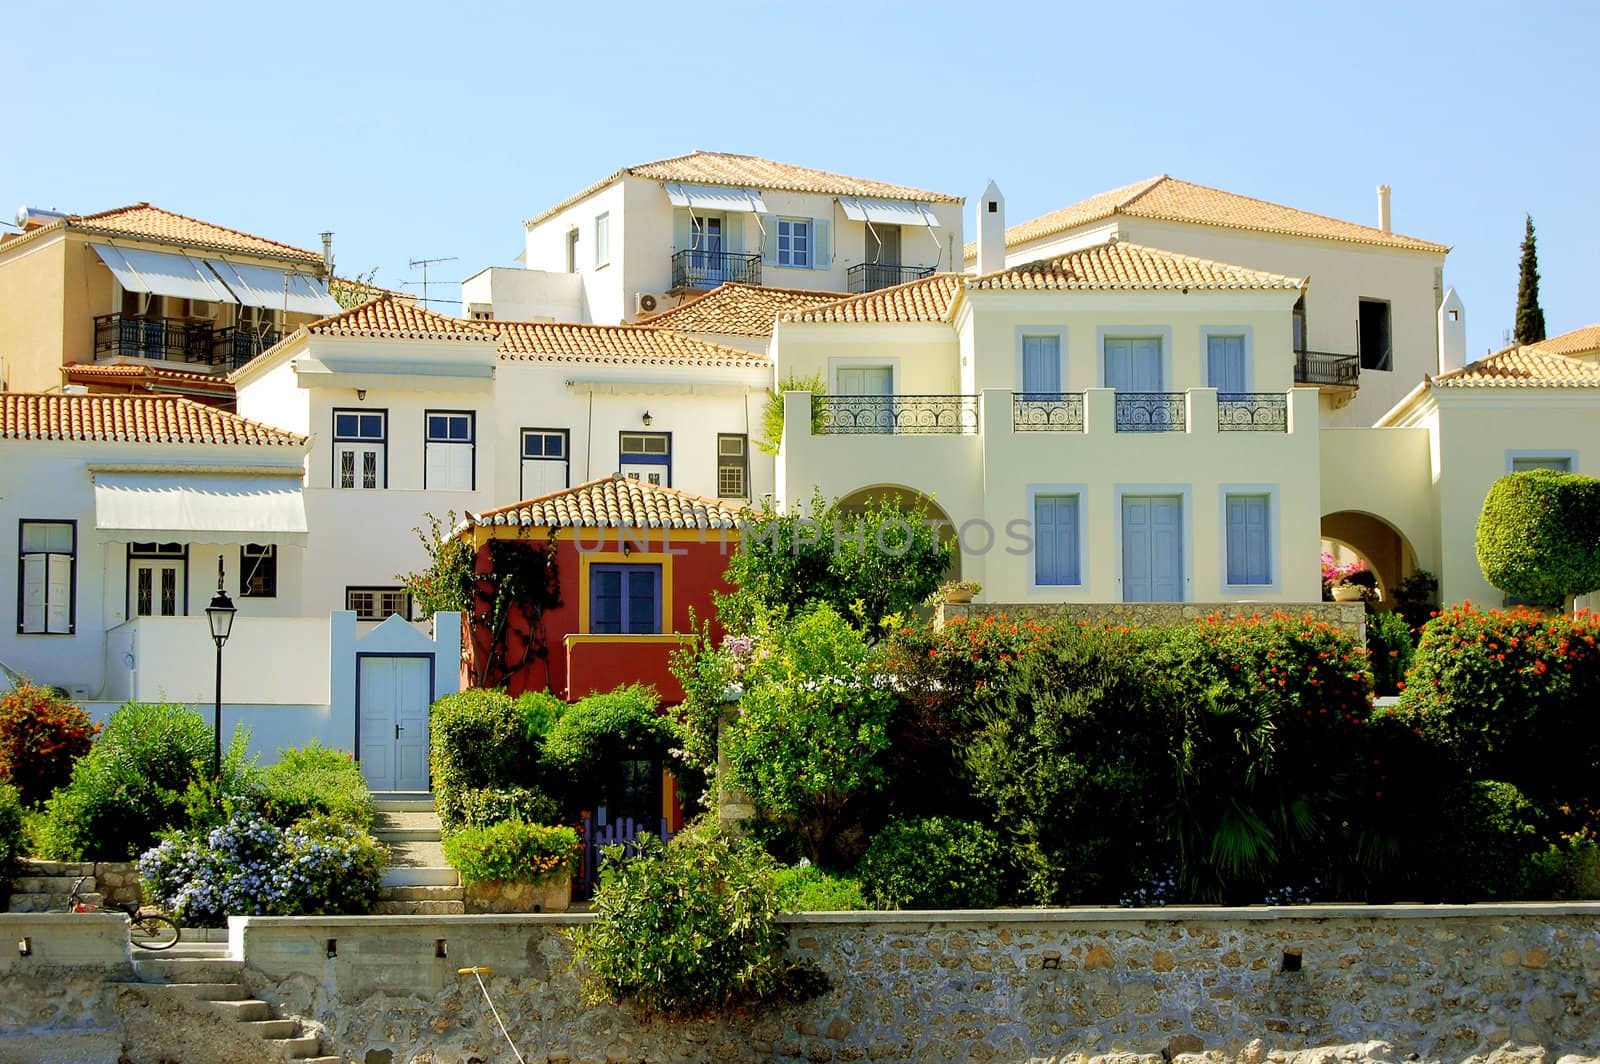 Houses with tiled roofs in Greece